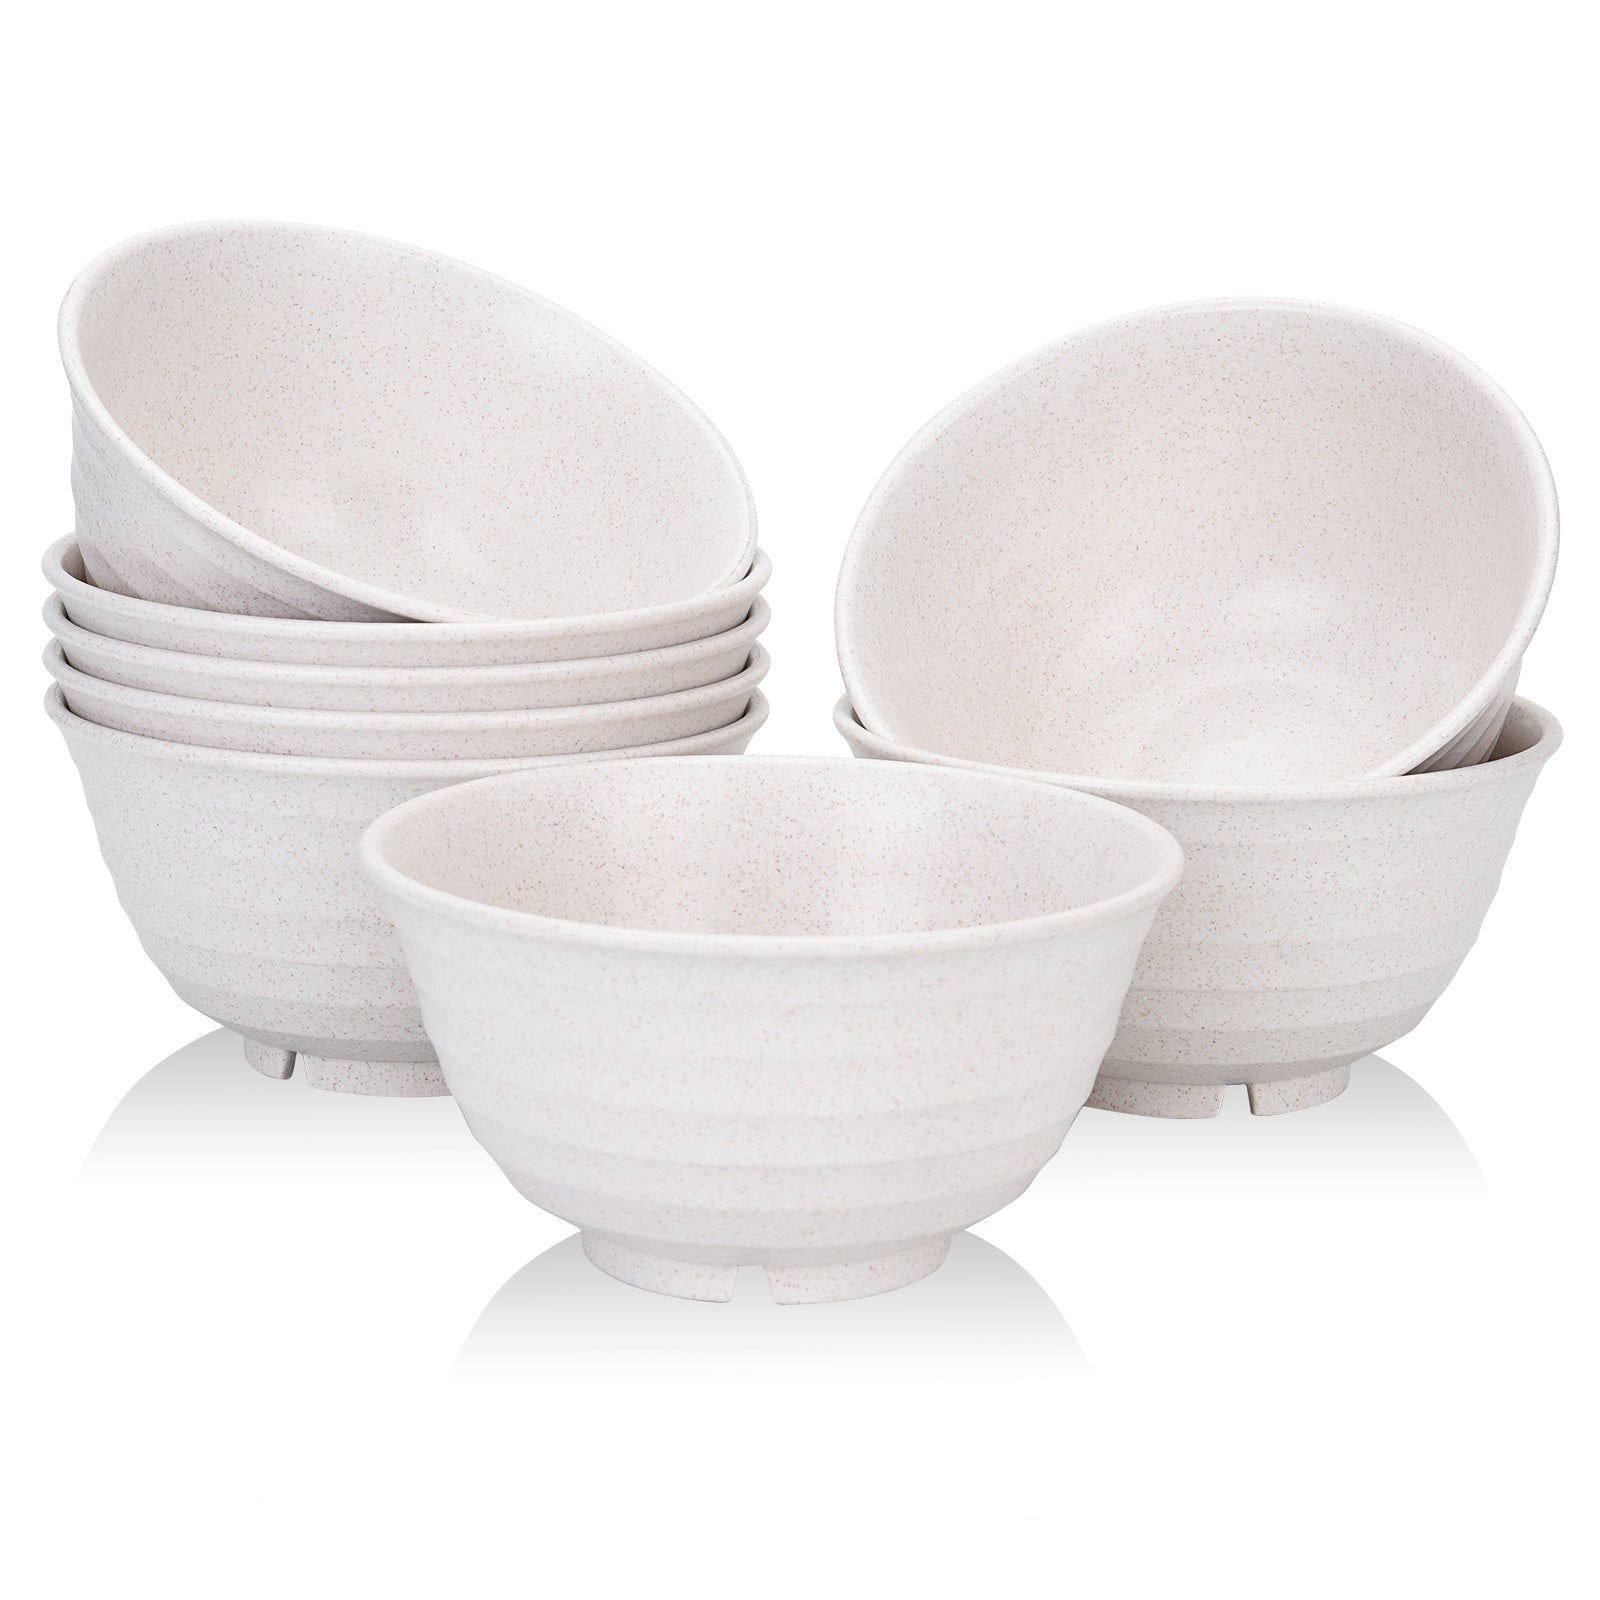 Wwyybfk 38oz Ceramic Soup Bowls, 7'' White Cereal Bowls Reusable Porcelain Bowl Set with Heat Insulation Pads Dishwasher & Microwave Safe for Home